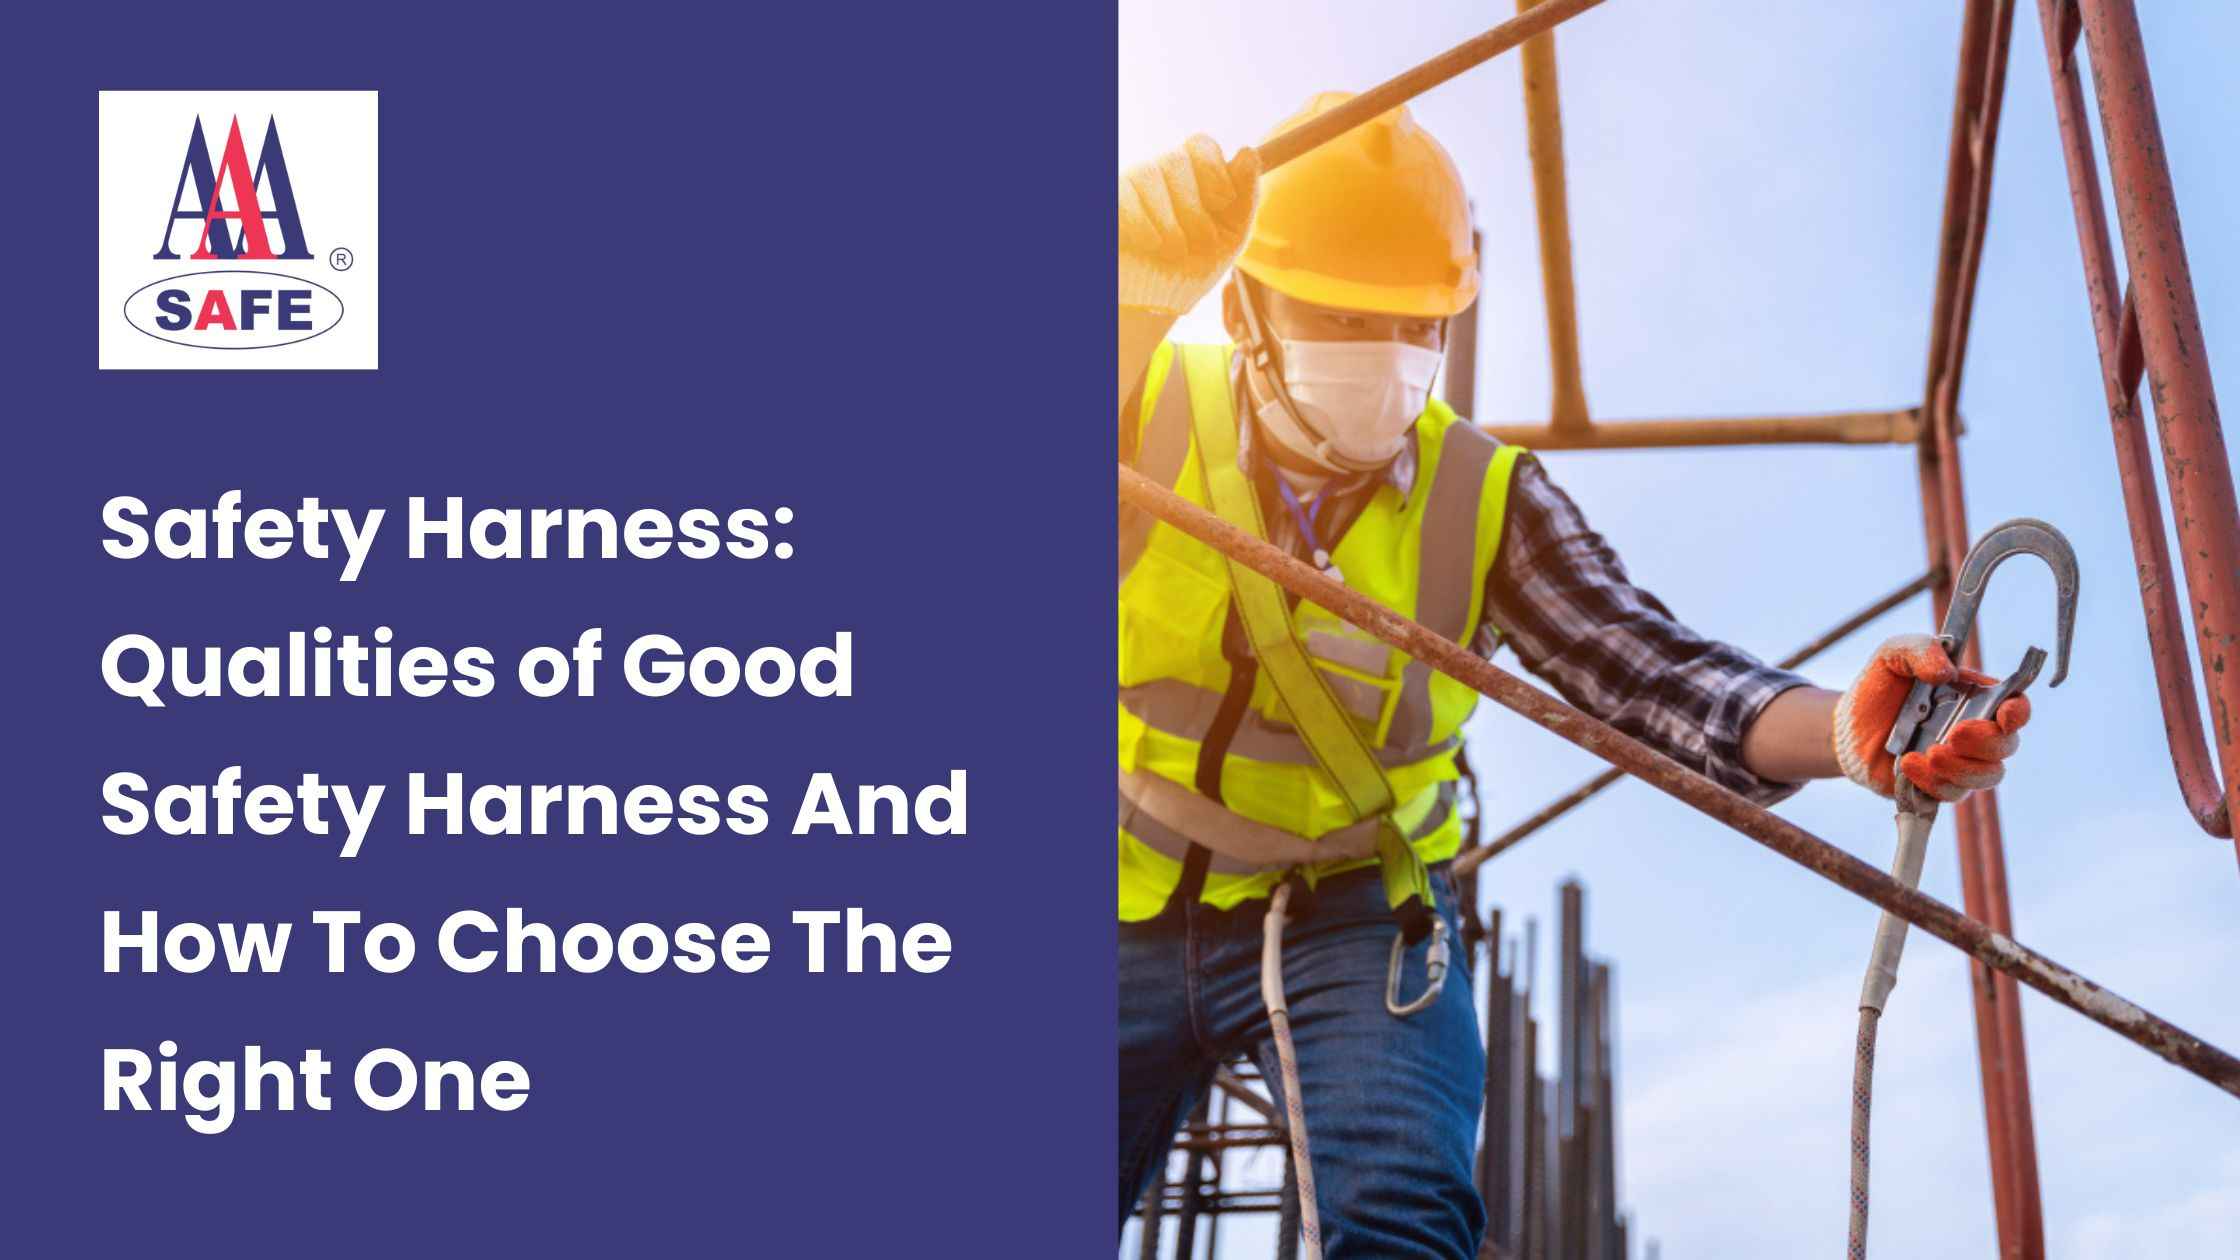 Safety Harness: Qualities of Good Safety Harness And How To Choose The Right One